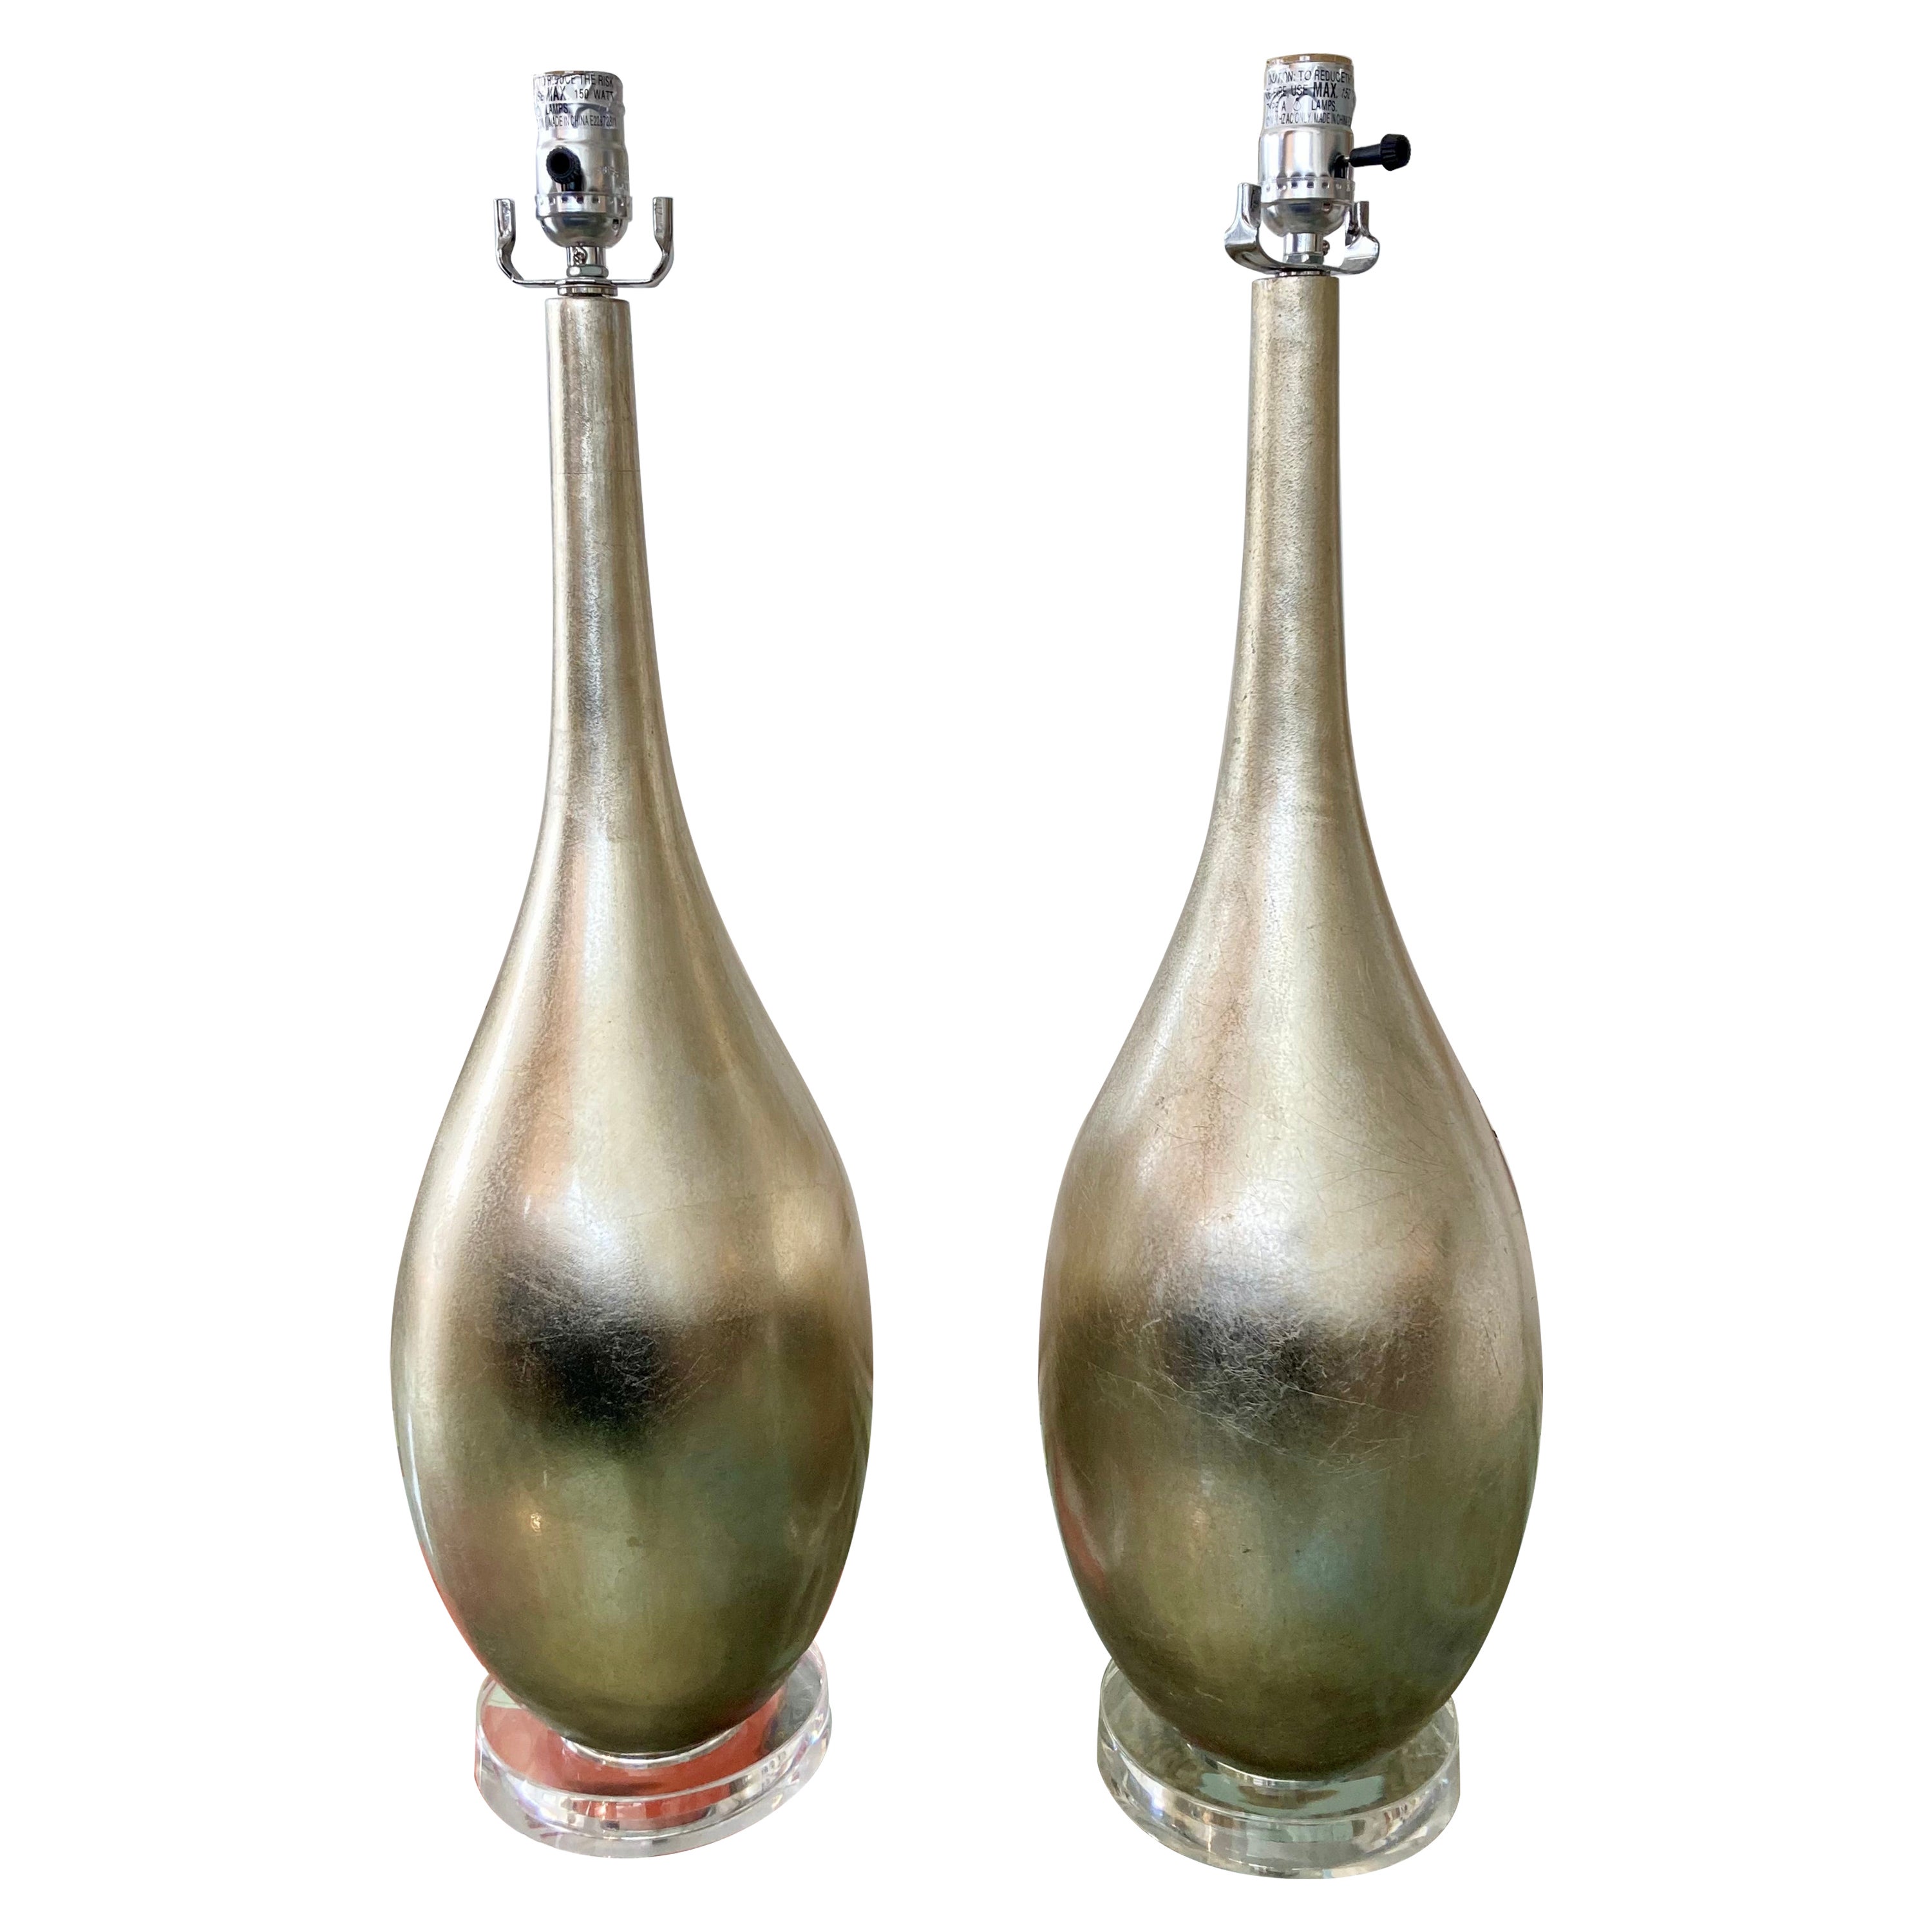 Modern Antique Silver Leaf Table Lamps With Lucite Bases, a Pair For Sale